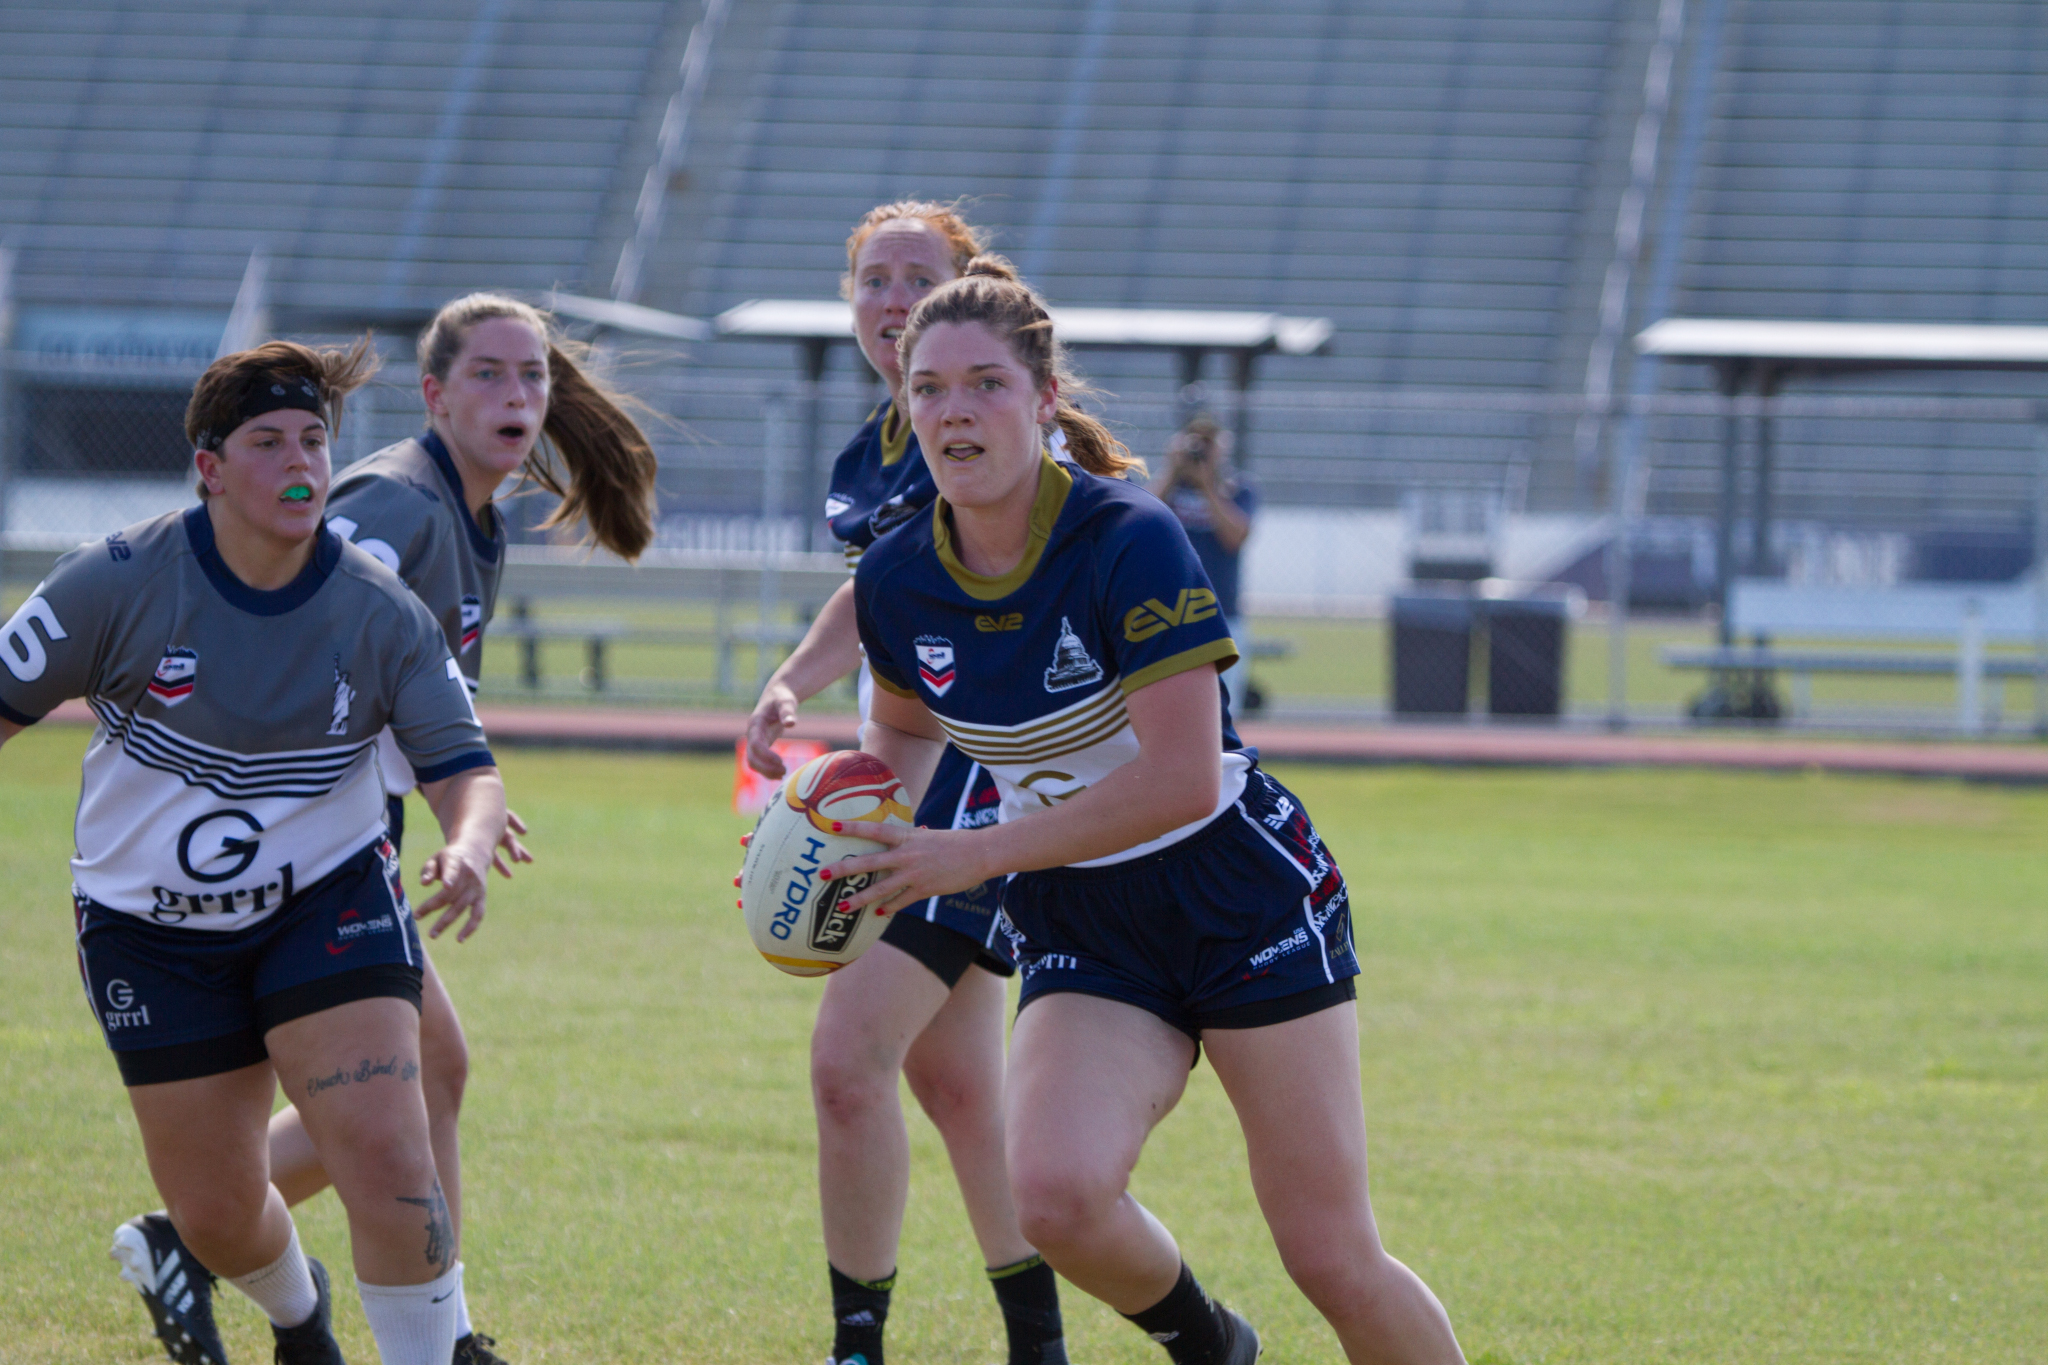 Women’s Rugby League highlights an afternoon of big hits in Jacksonville